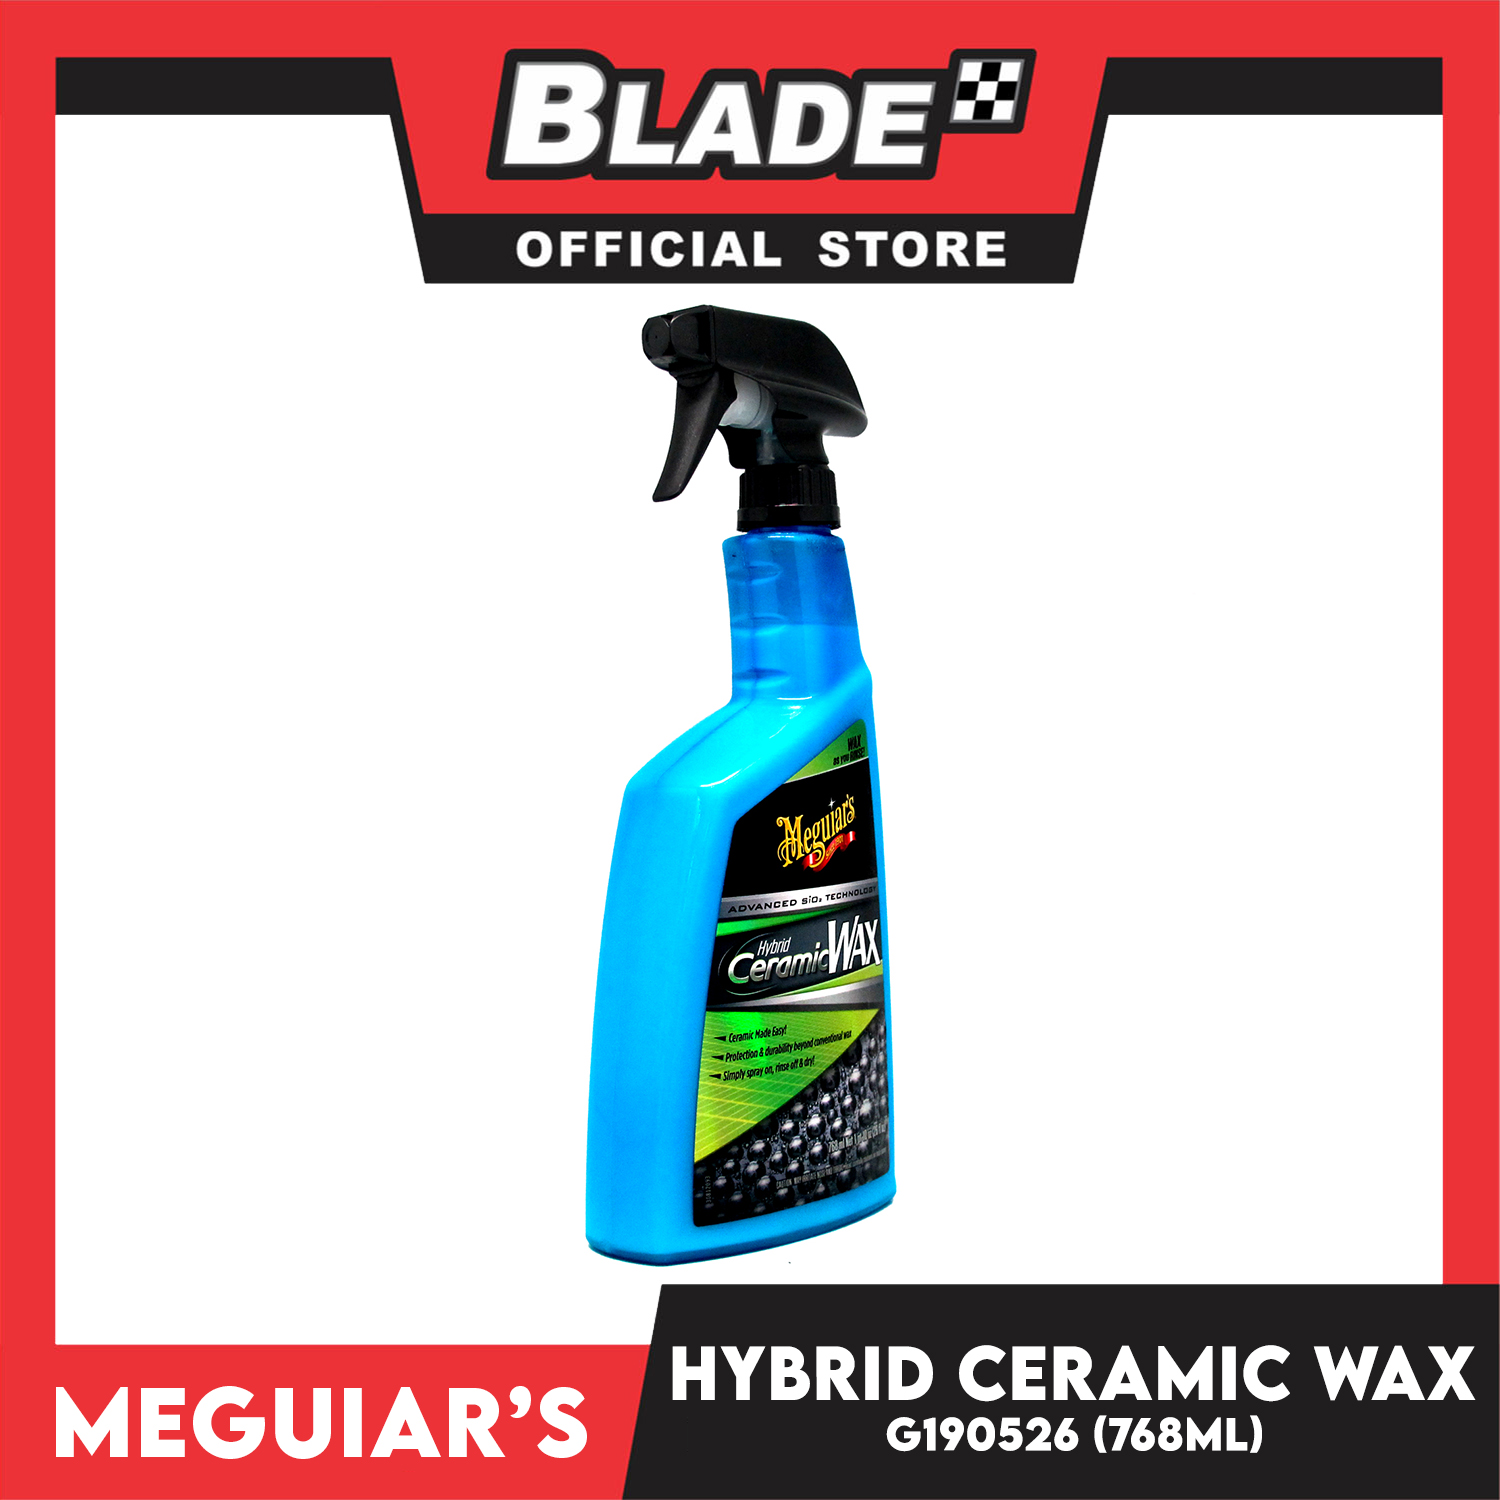 Meguiars Hybrid Ceramic Spray Wax - SiO2 Hybrid Technology in an  Easy-to-Use Spray Application That Delivers Long-Lasting Protection - 32 Oz